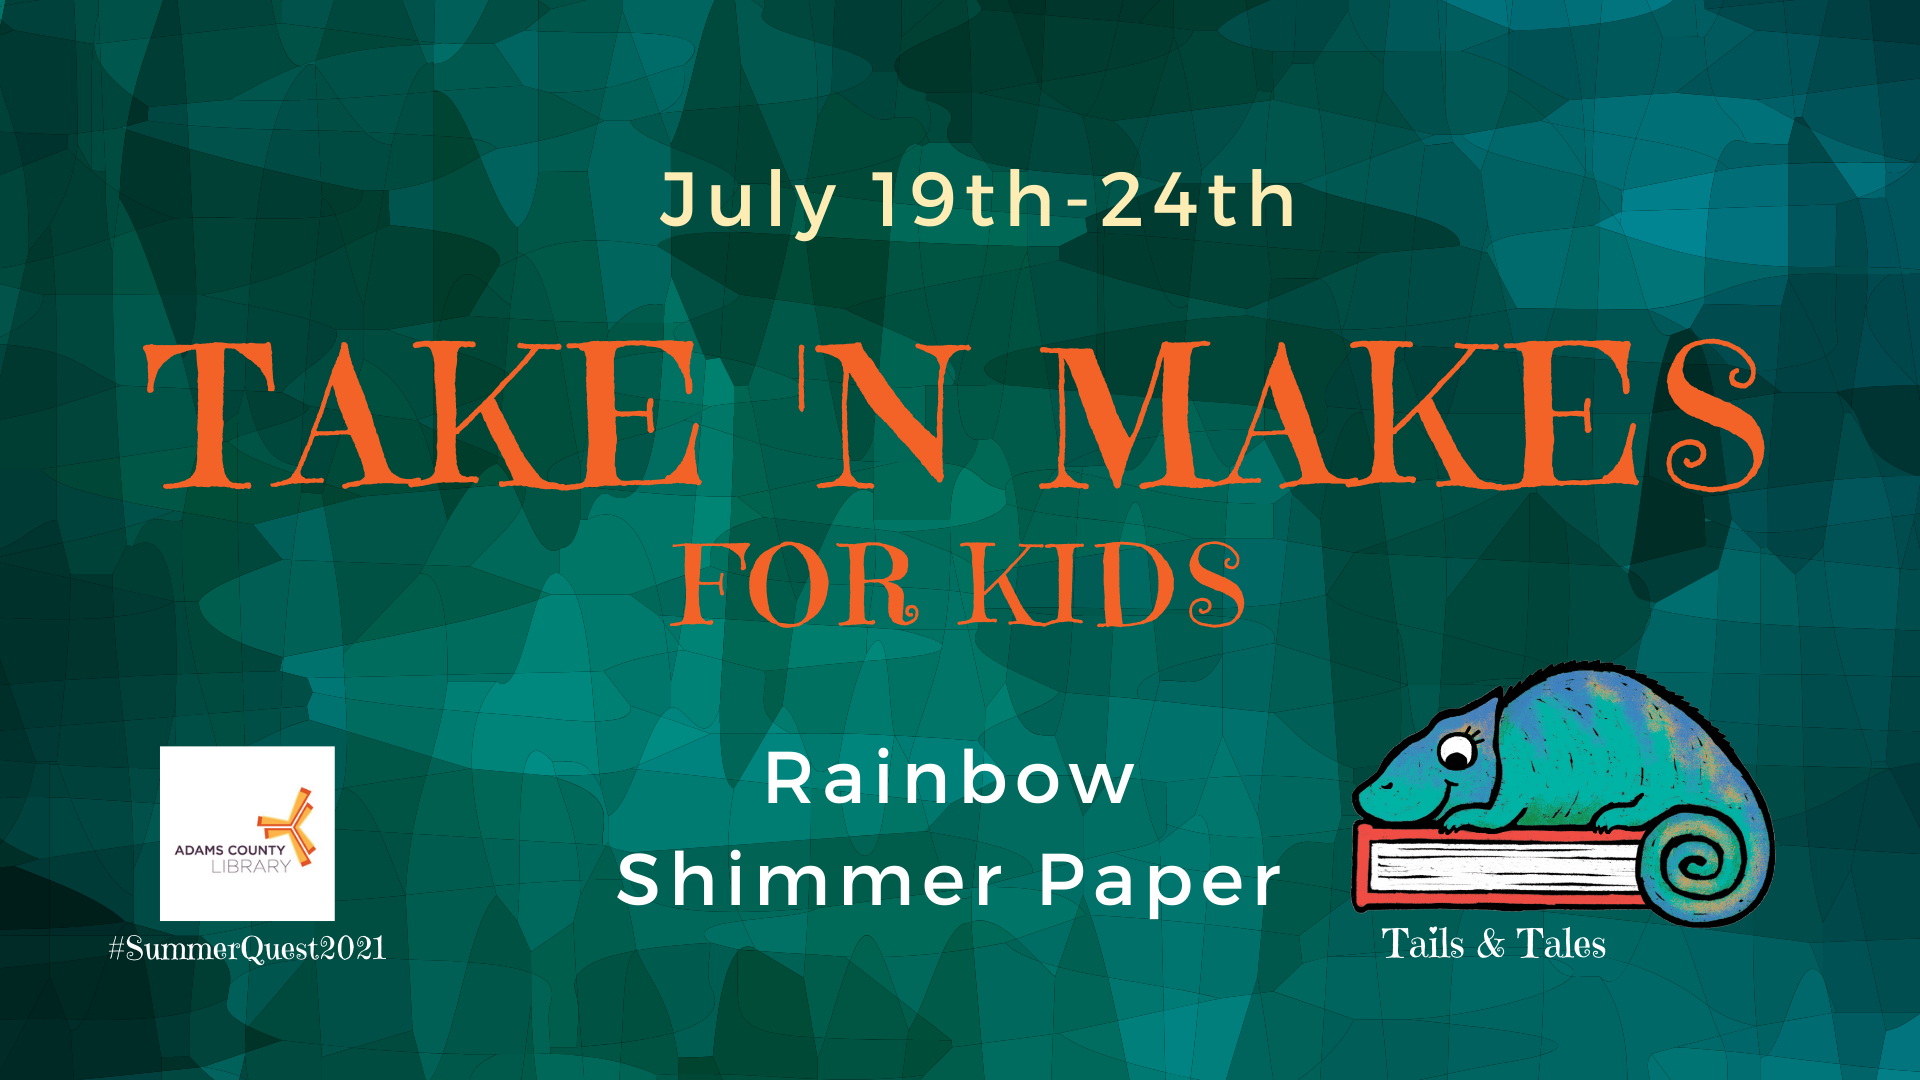 Pick up a Take n' Make for Kids from July 19th through July 24th. This week the project is Rainbow Shimmer Paper!